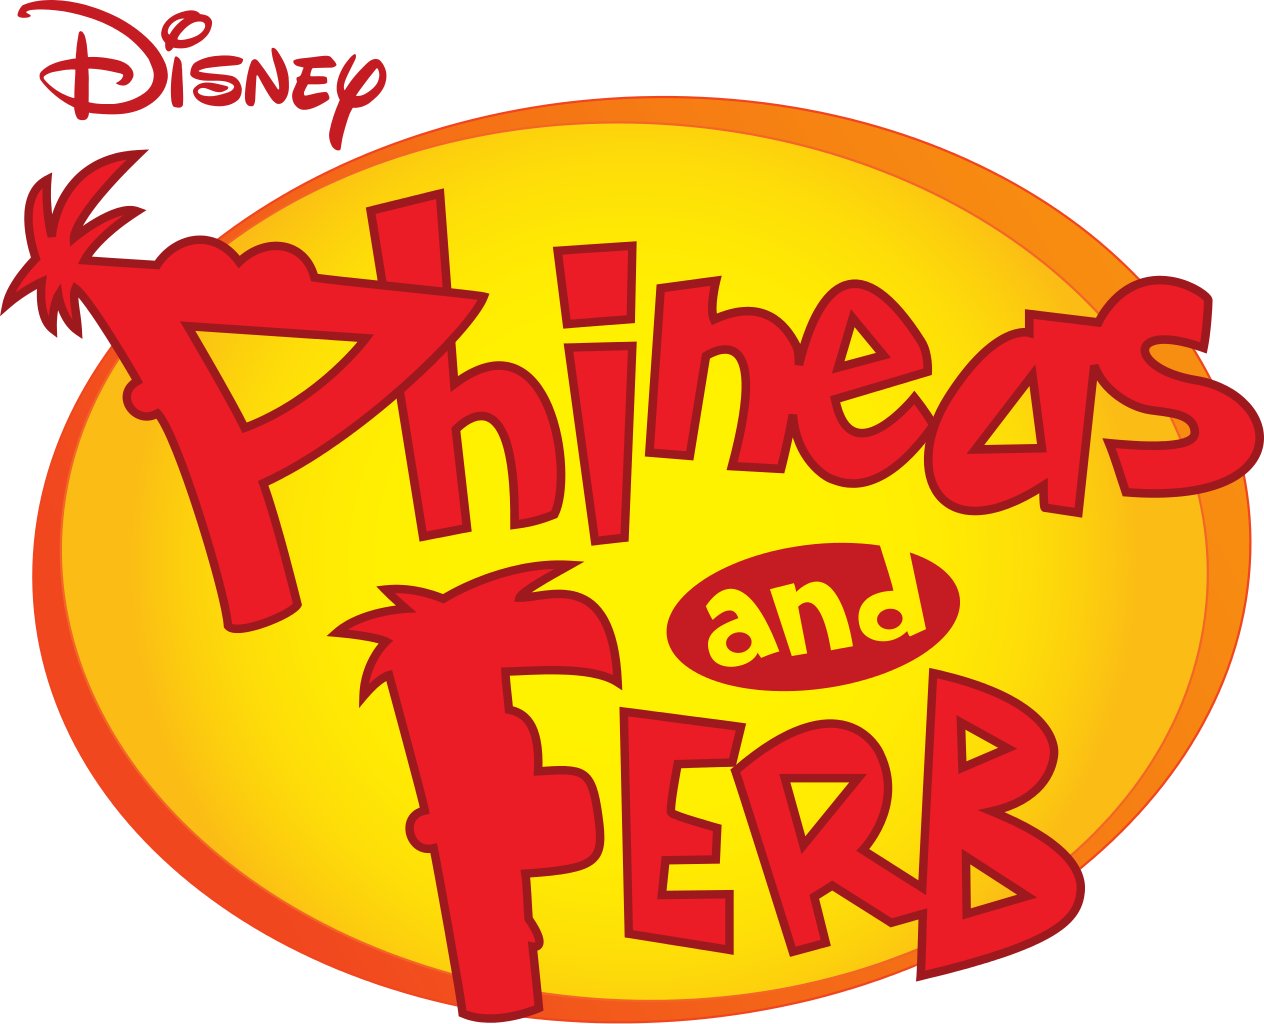 Phineas and Ferb Logo.